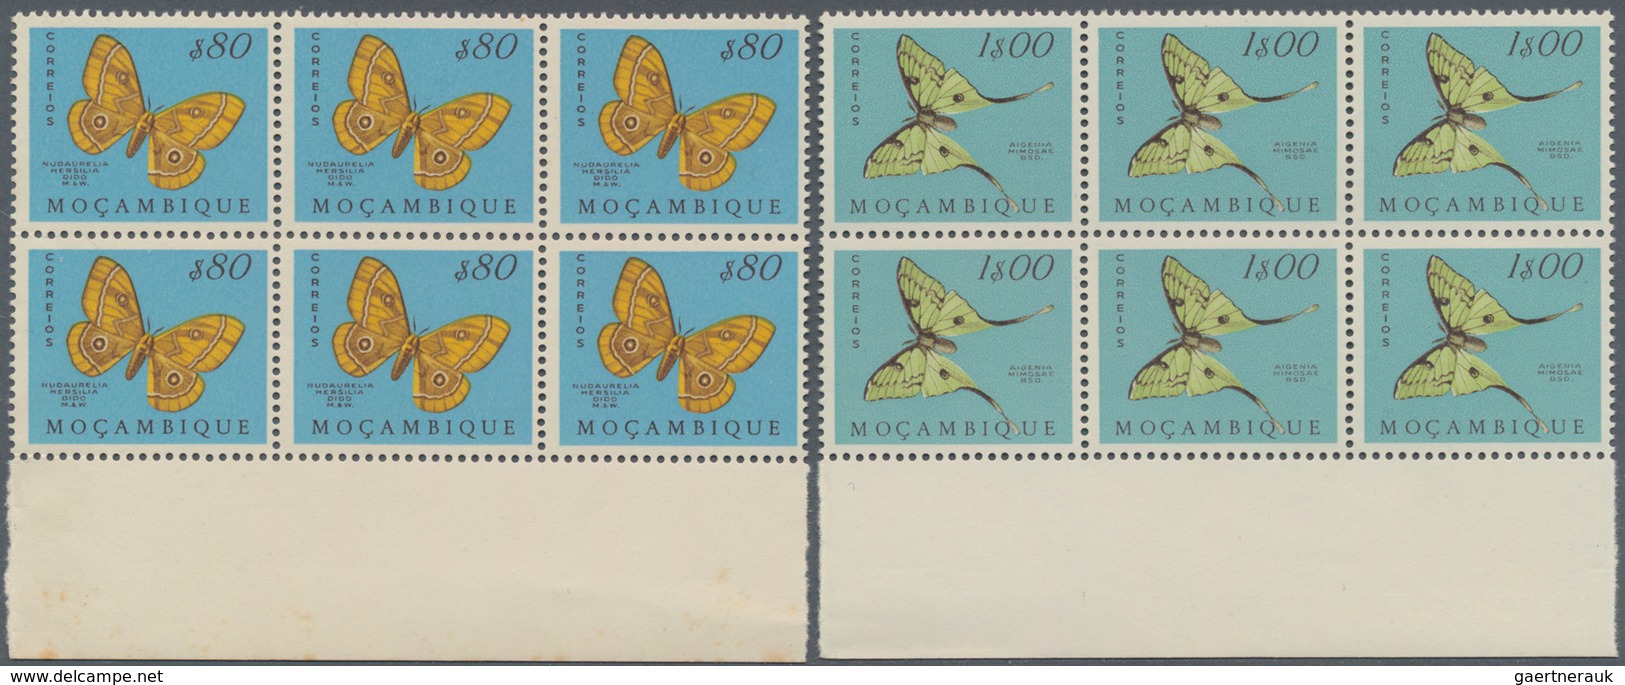 Mocambique: 1953, butterflies, 20 values in blocks of six mint never hinged. Rare set! Michel catalo